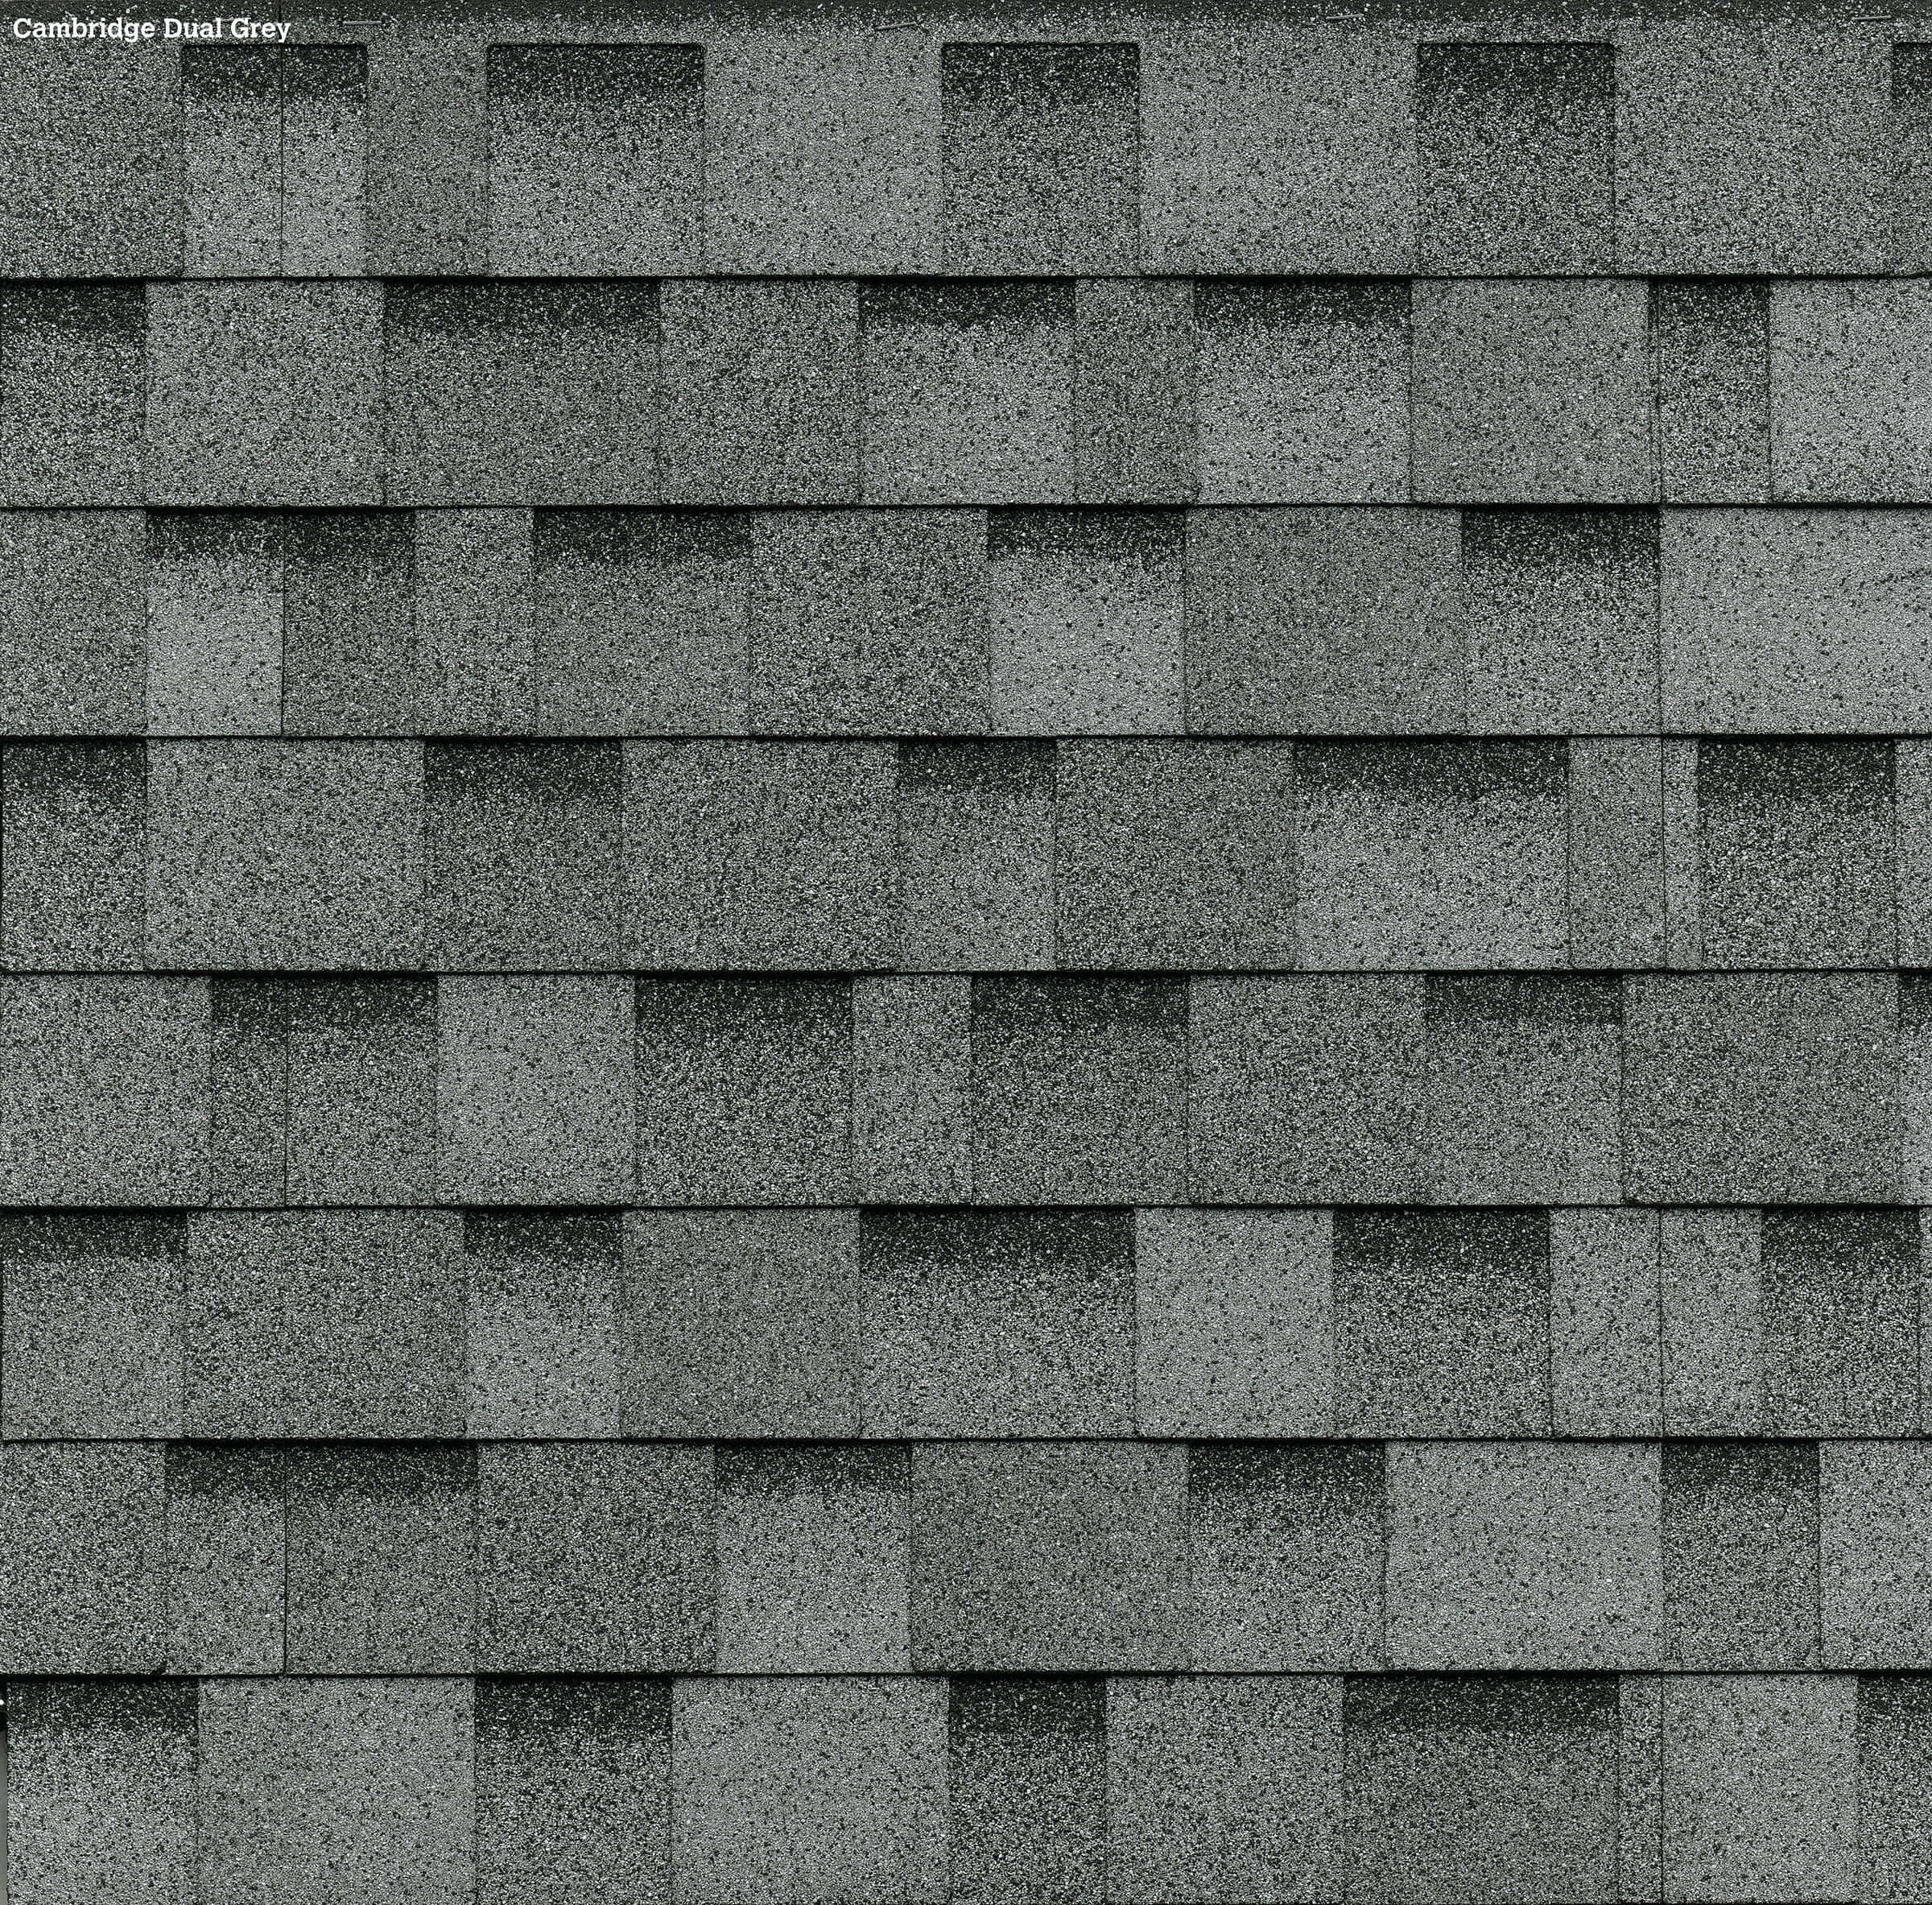 Dual Gray Architectural Shingles Shed Color